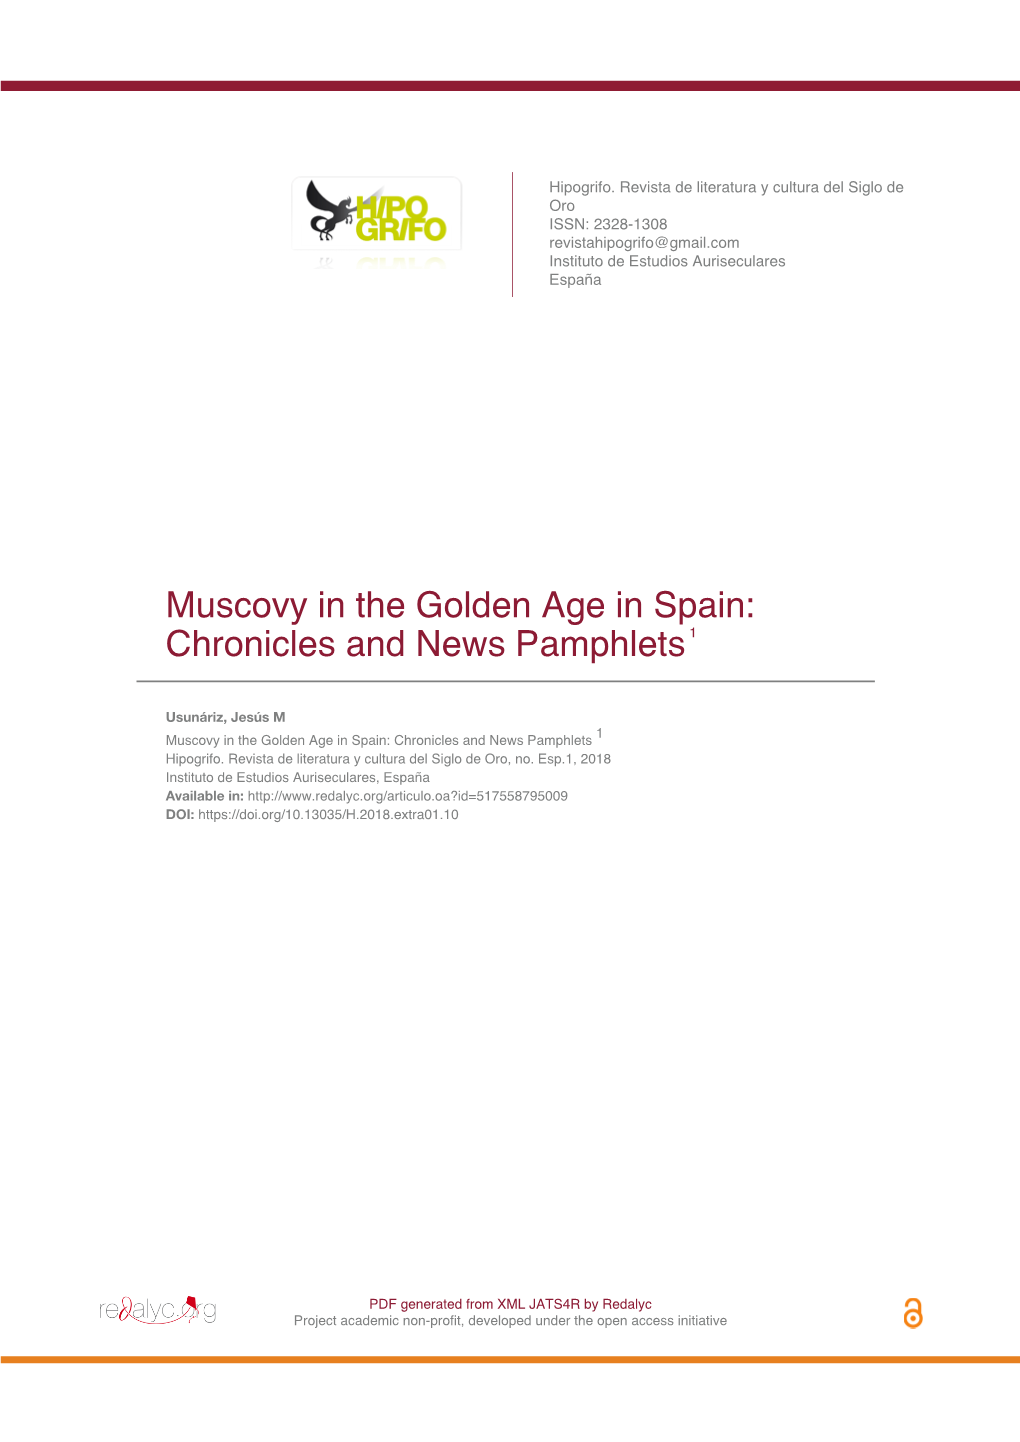 Muscovy in the Golden Age in Spain: Chronicles and News Pamphlets 1